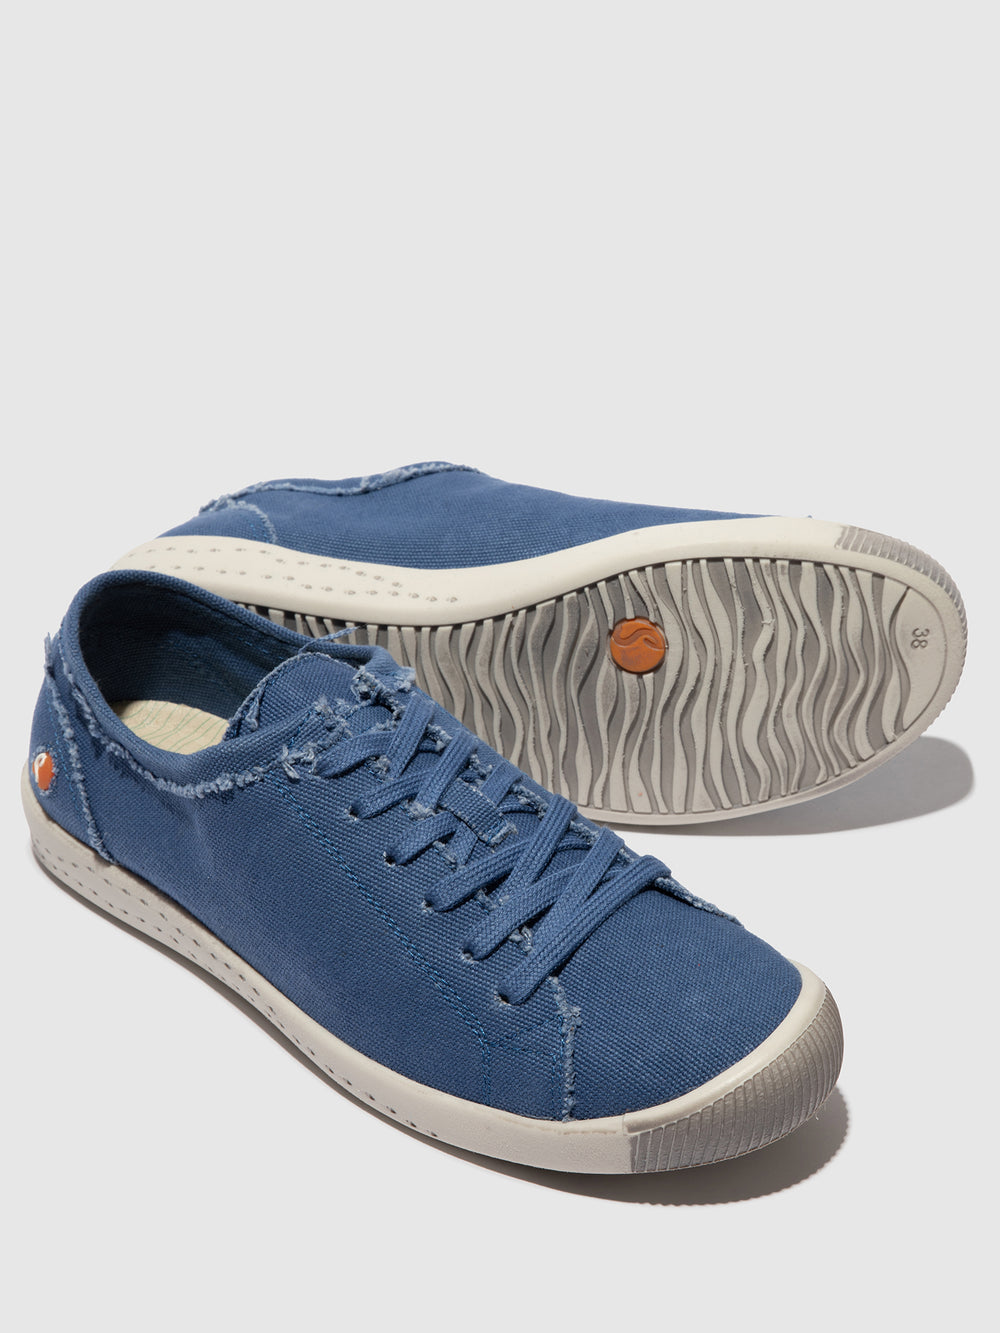 Lace-up Trainers ISLA154SOF RECYCLED COTTON BLUE